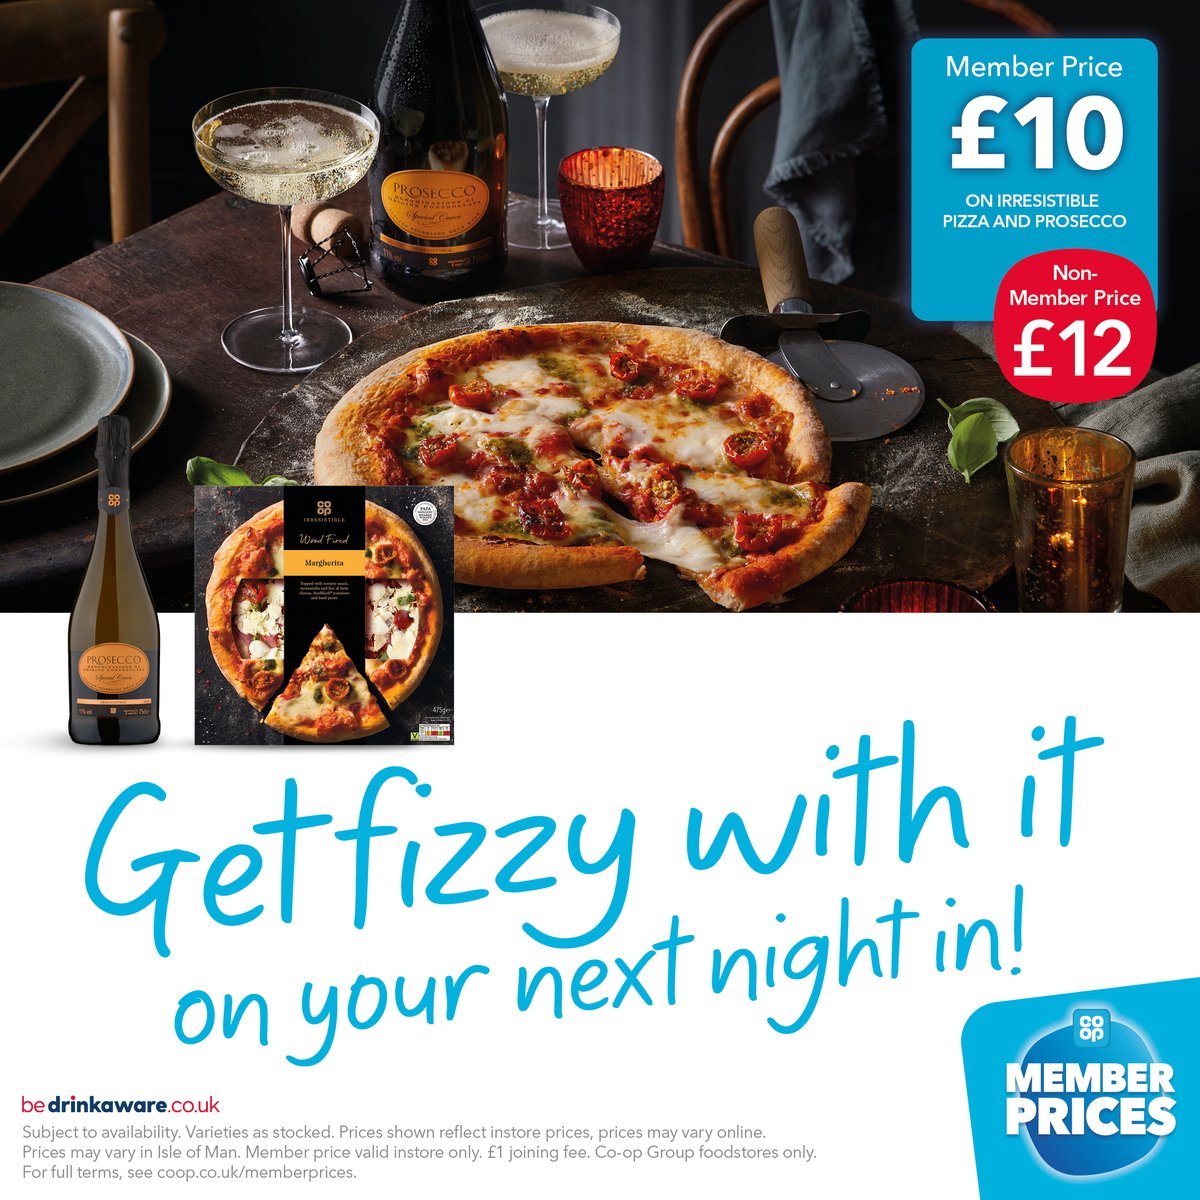 Irresistible pizza and prosecco? What more could you ask for on your next big night in! 🎊🍾🍕 Find this deal and more in your local Co-op store. Don't forget @coopuk Members save more, sign up here if you're not already a Member 👉 coop.co.uk/membership